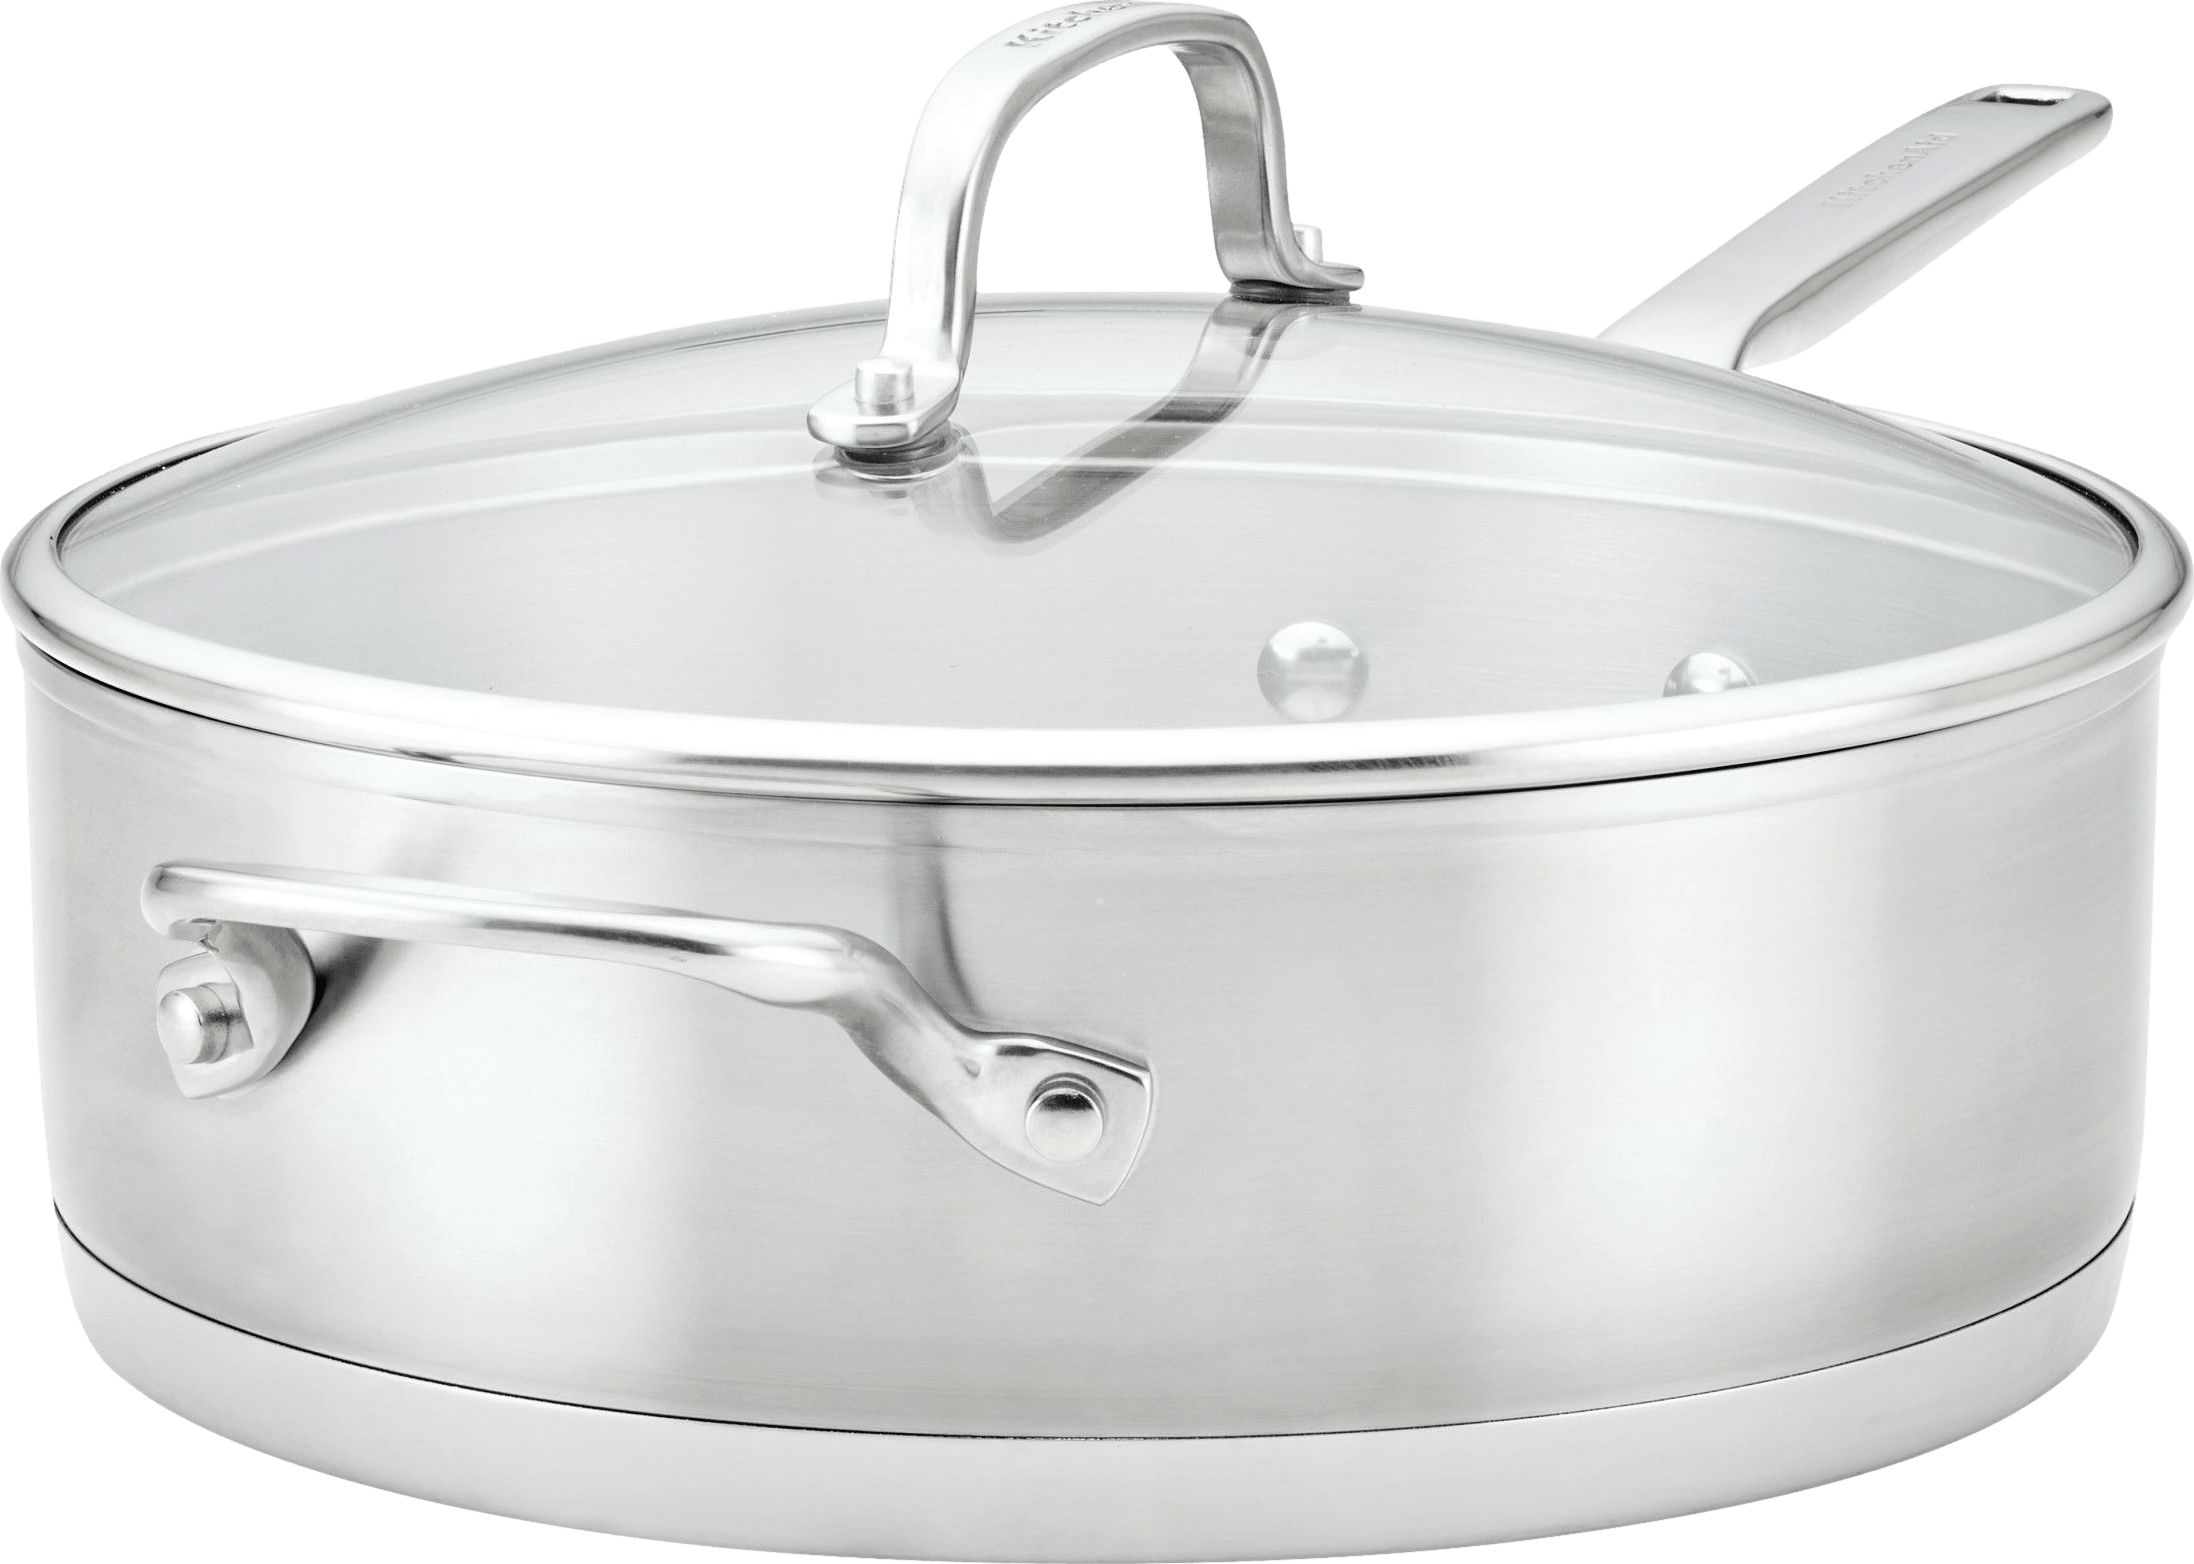 KitchenAid 3-Ply Base Stainless Steel Induction Saute Pan with